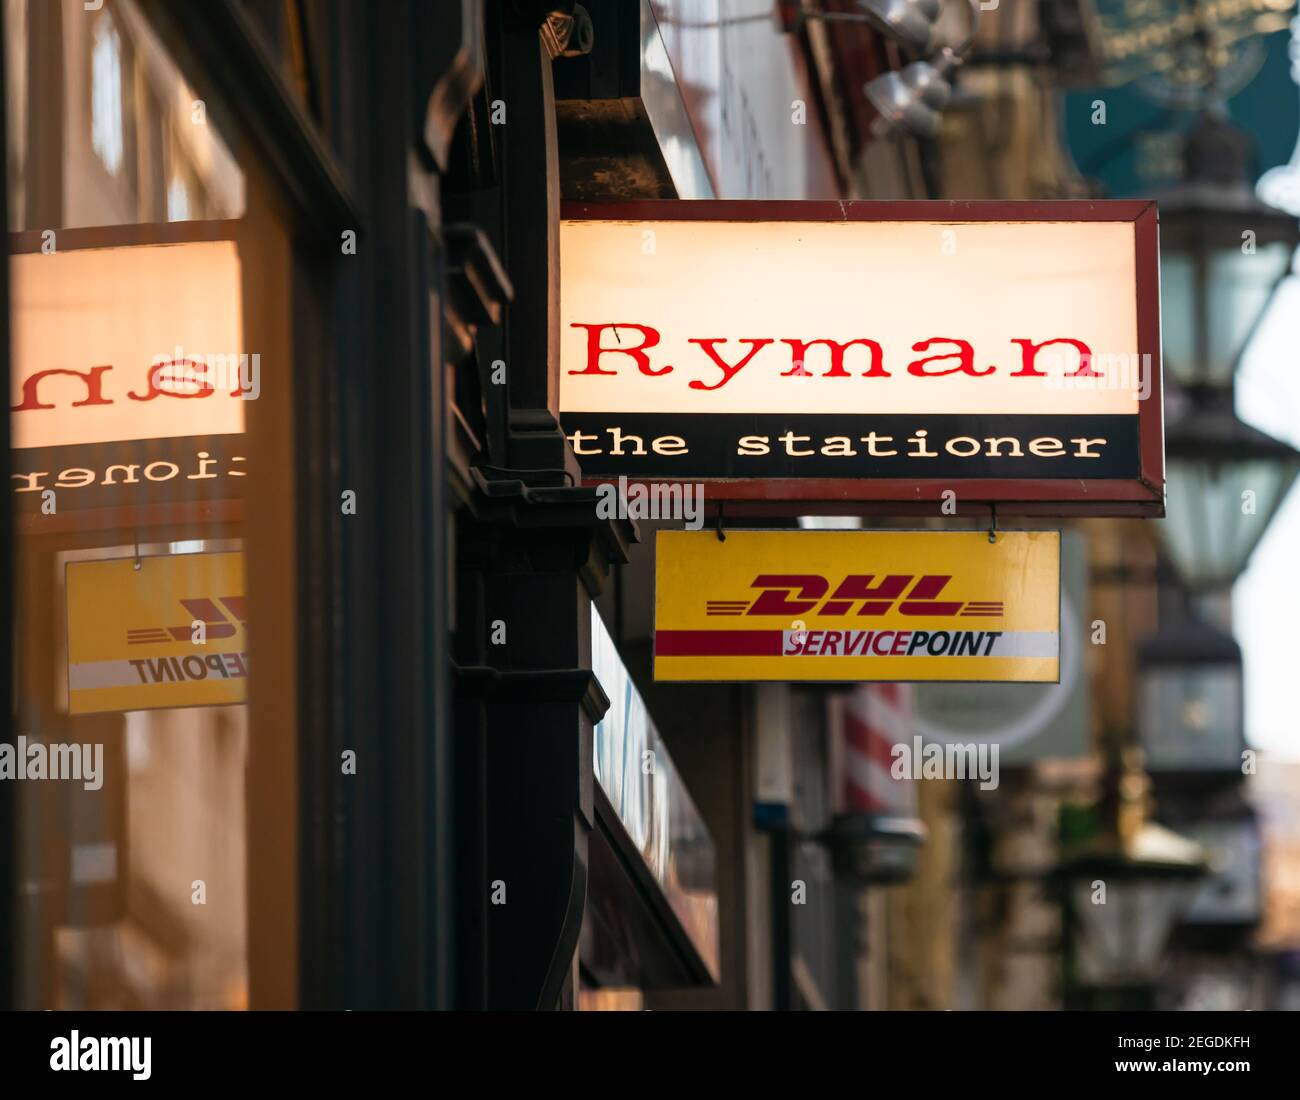 Ryman the stationer stationery store shop sign with window reflection, and DHL Service Point sign below, Birmingham, UK Stock Photo